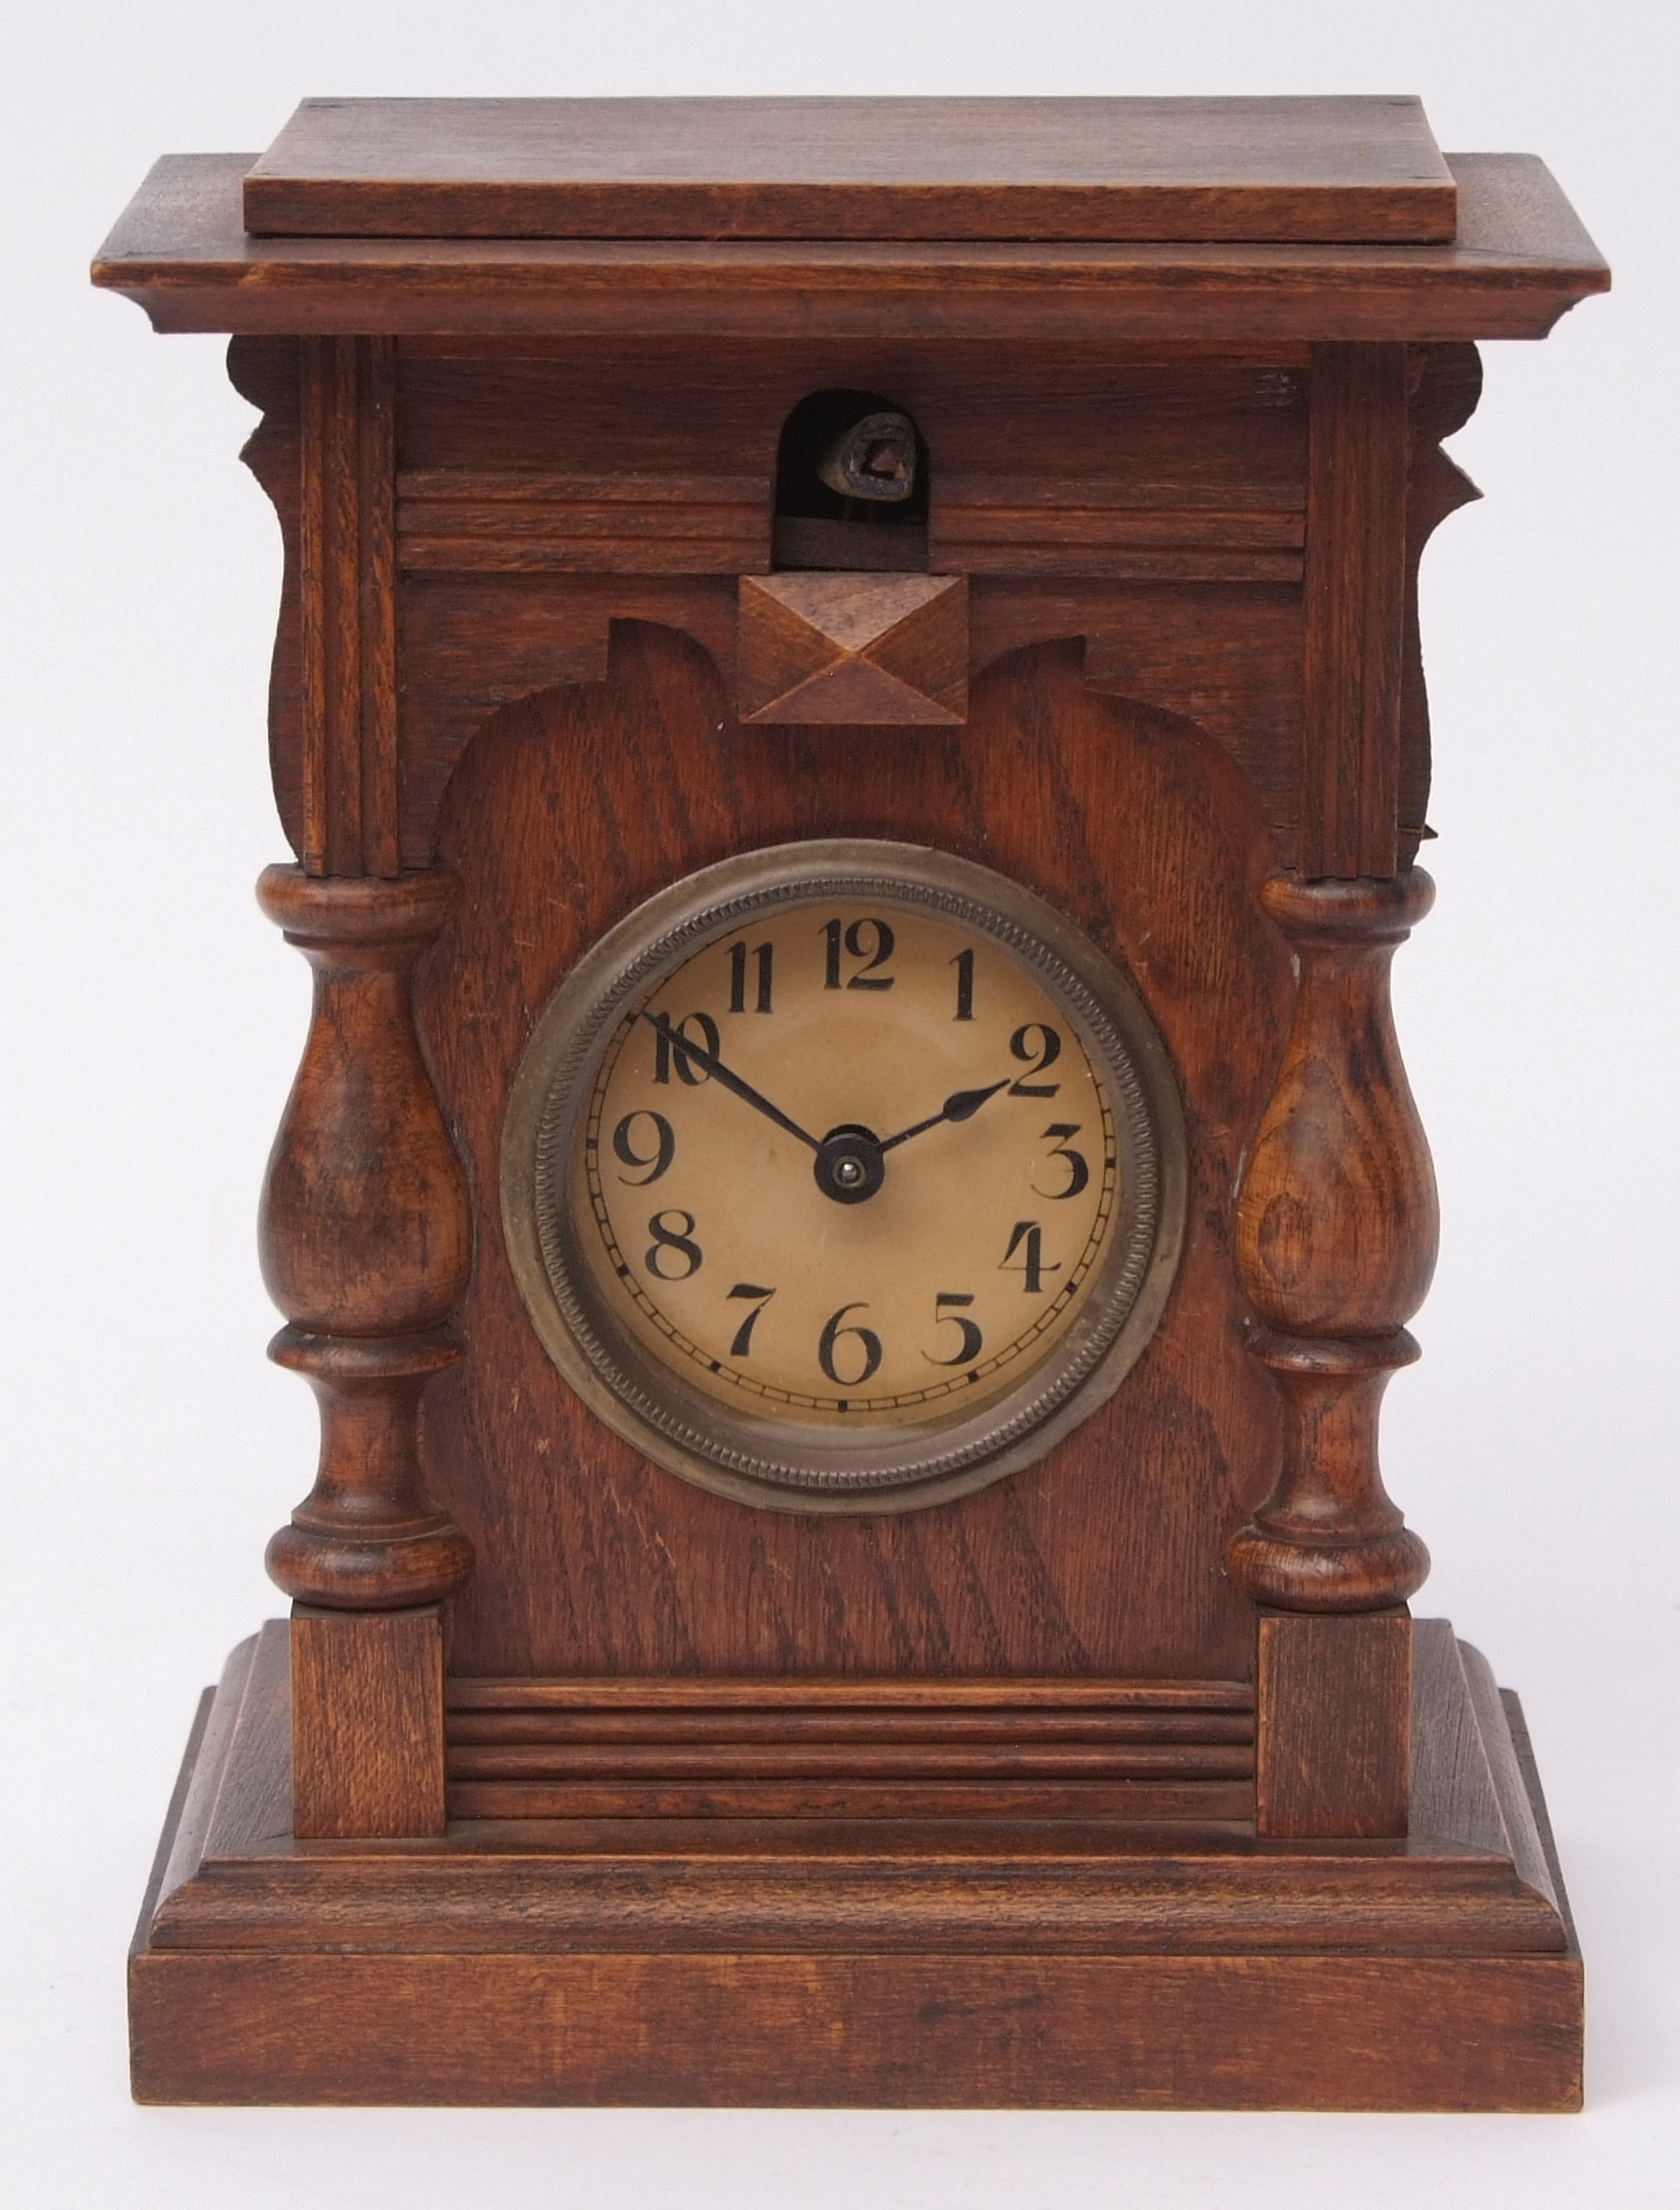 Unusual early 20th century cuckoo clock, pen shaped case with overhanging cornice and half